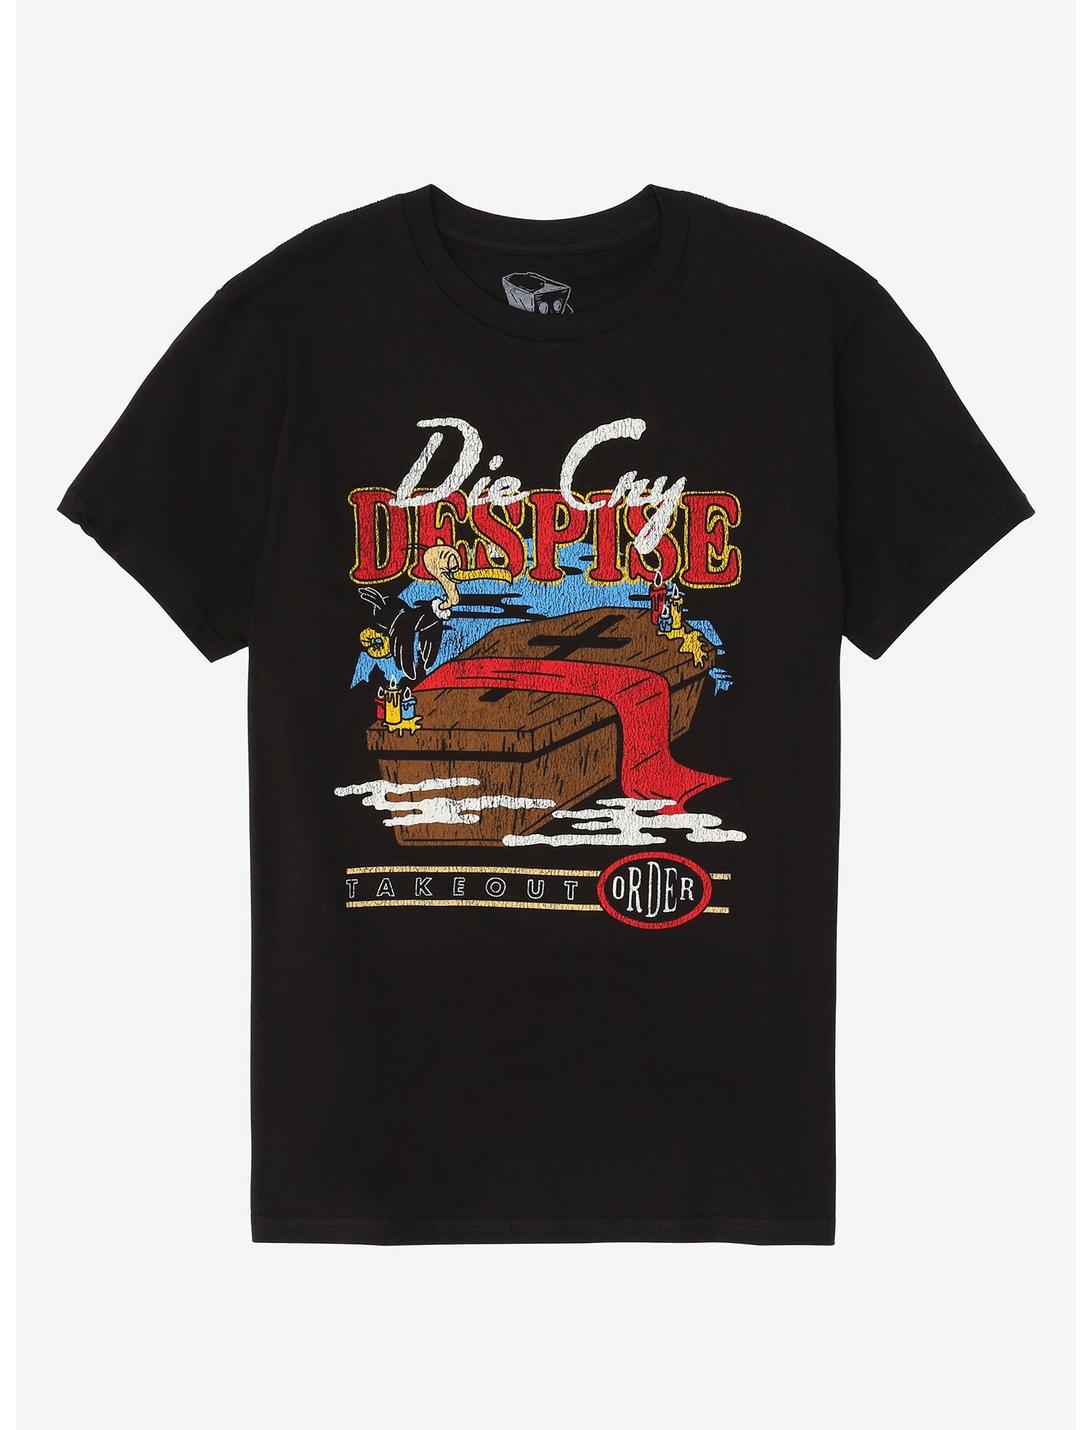 Die Cry Despise T-Shirt By Takeout Order, MULTI, hi-res